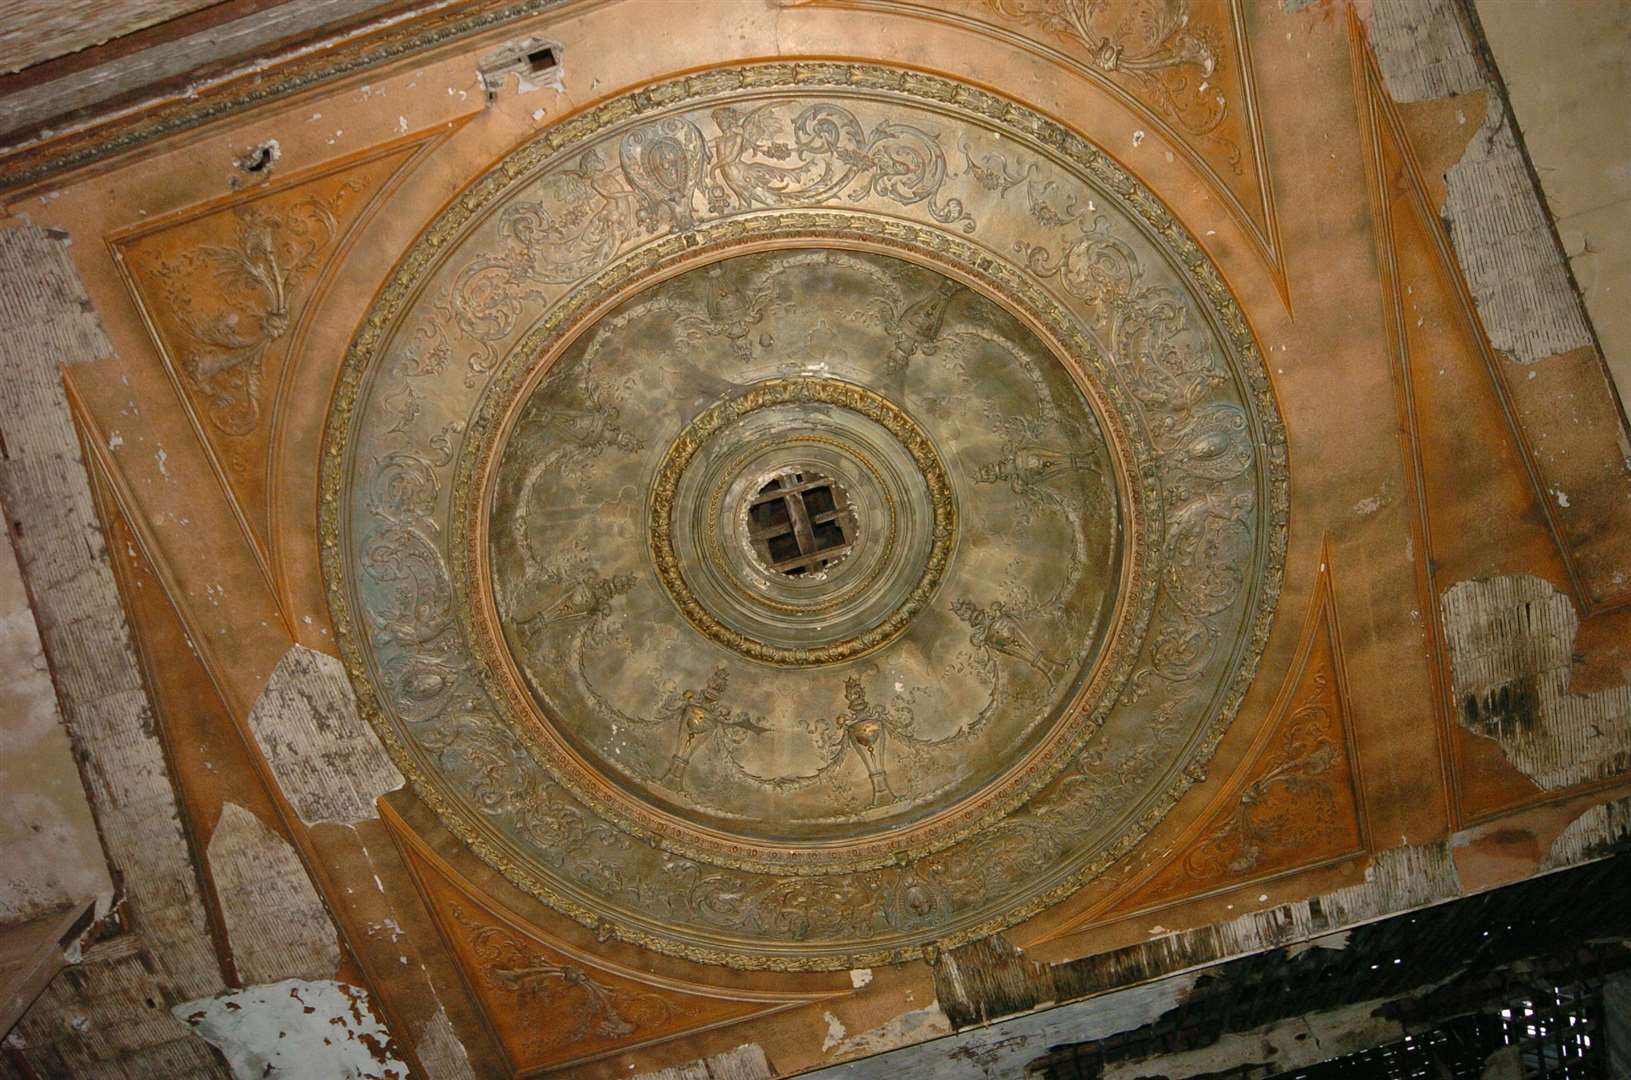 An ornate chandelier once hung from the top of the auditorium, which was demolished in 2009